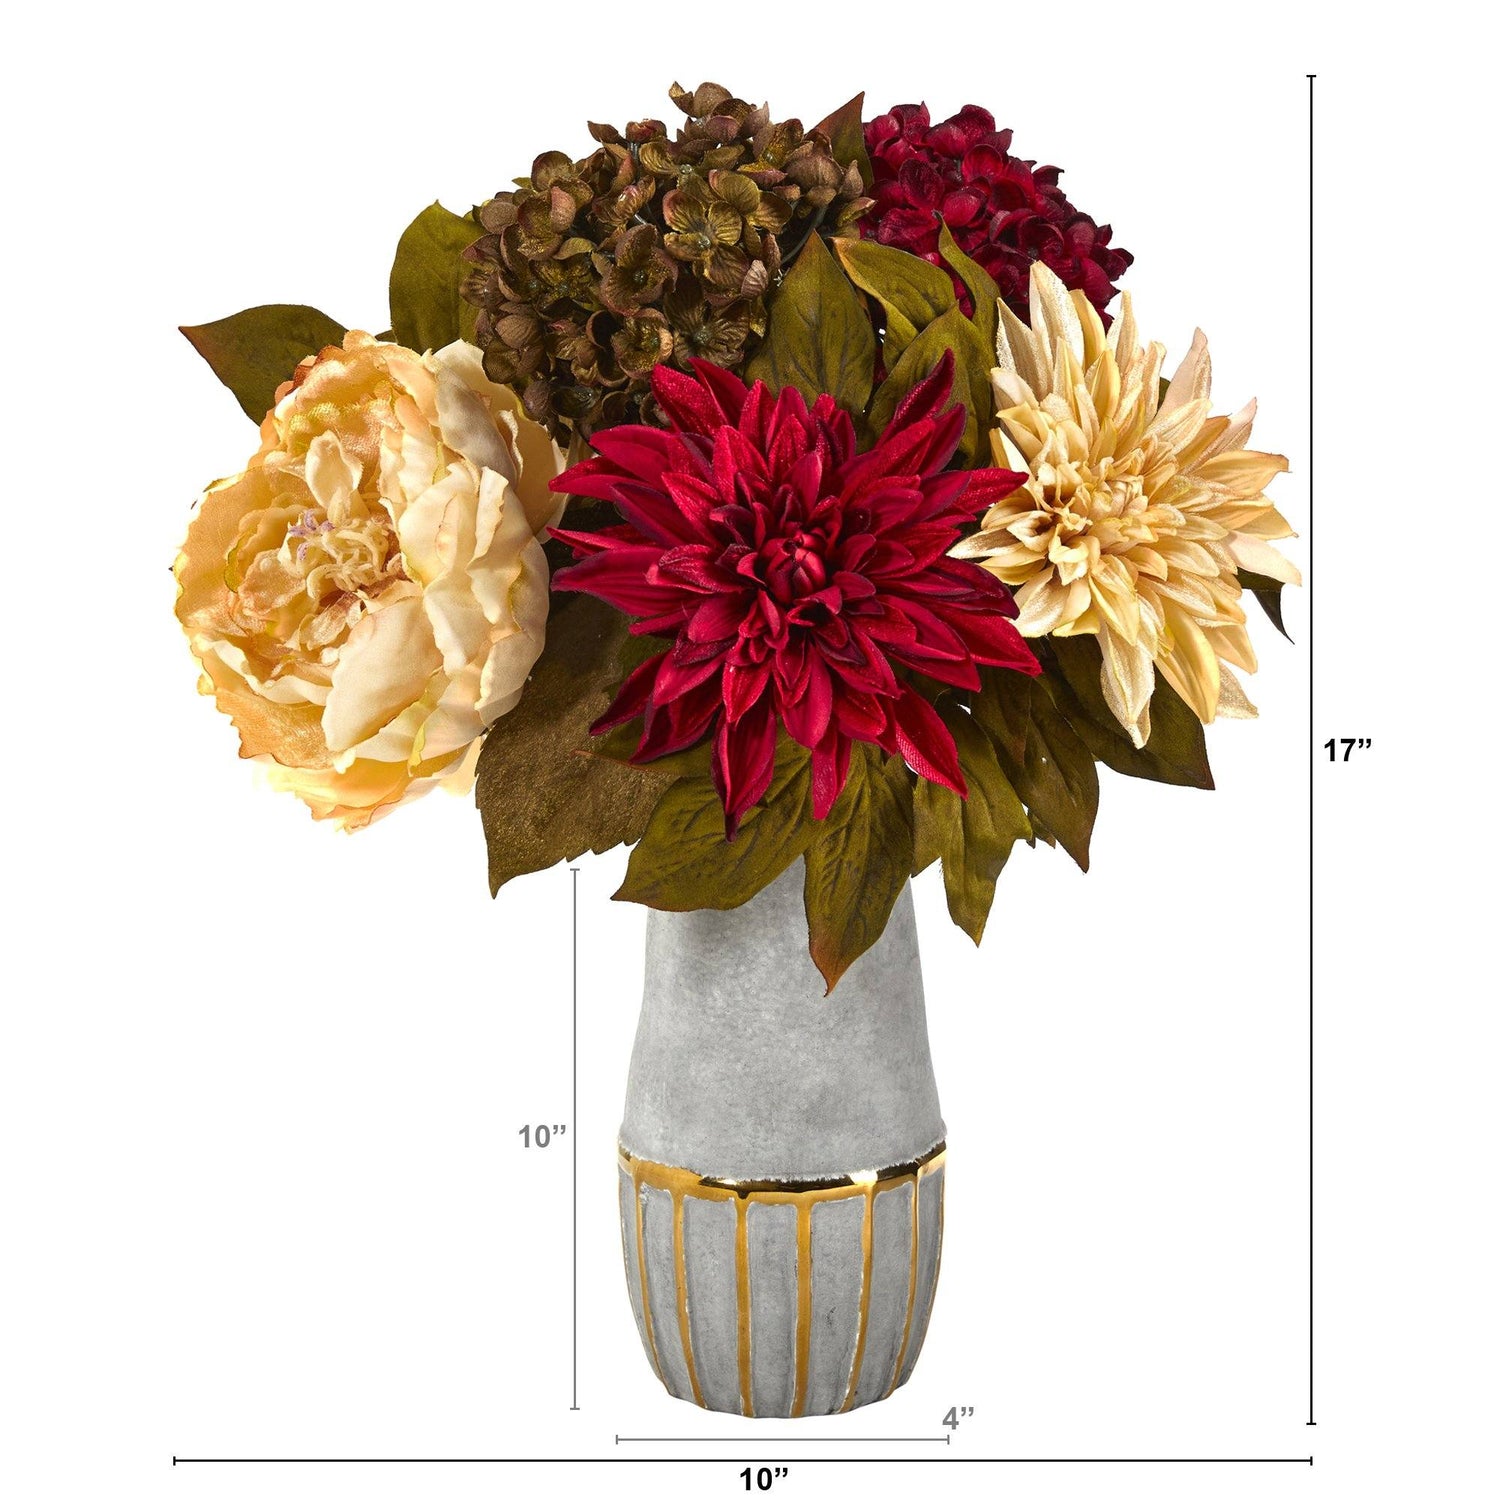 17” Peony, Hydrangea and Dahlia Artificial Arrangement in Stoneware Vase with Gold Trimming